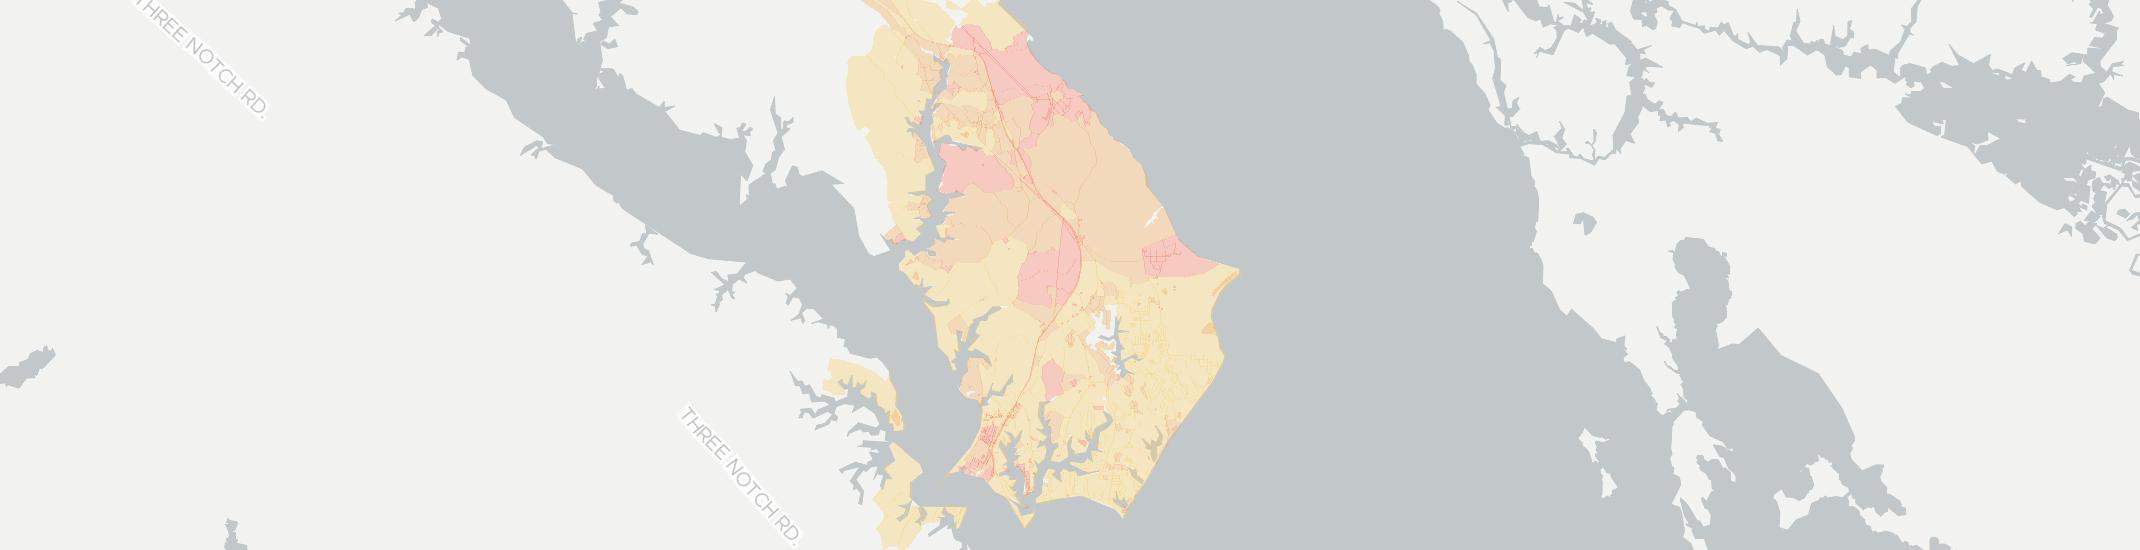 Lusby Internet Competition Map. Click for interactive map.